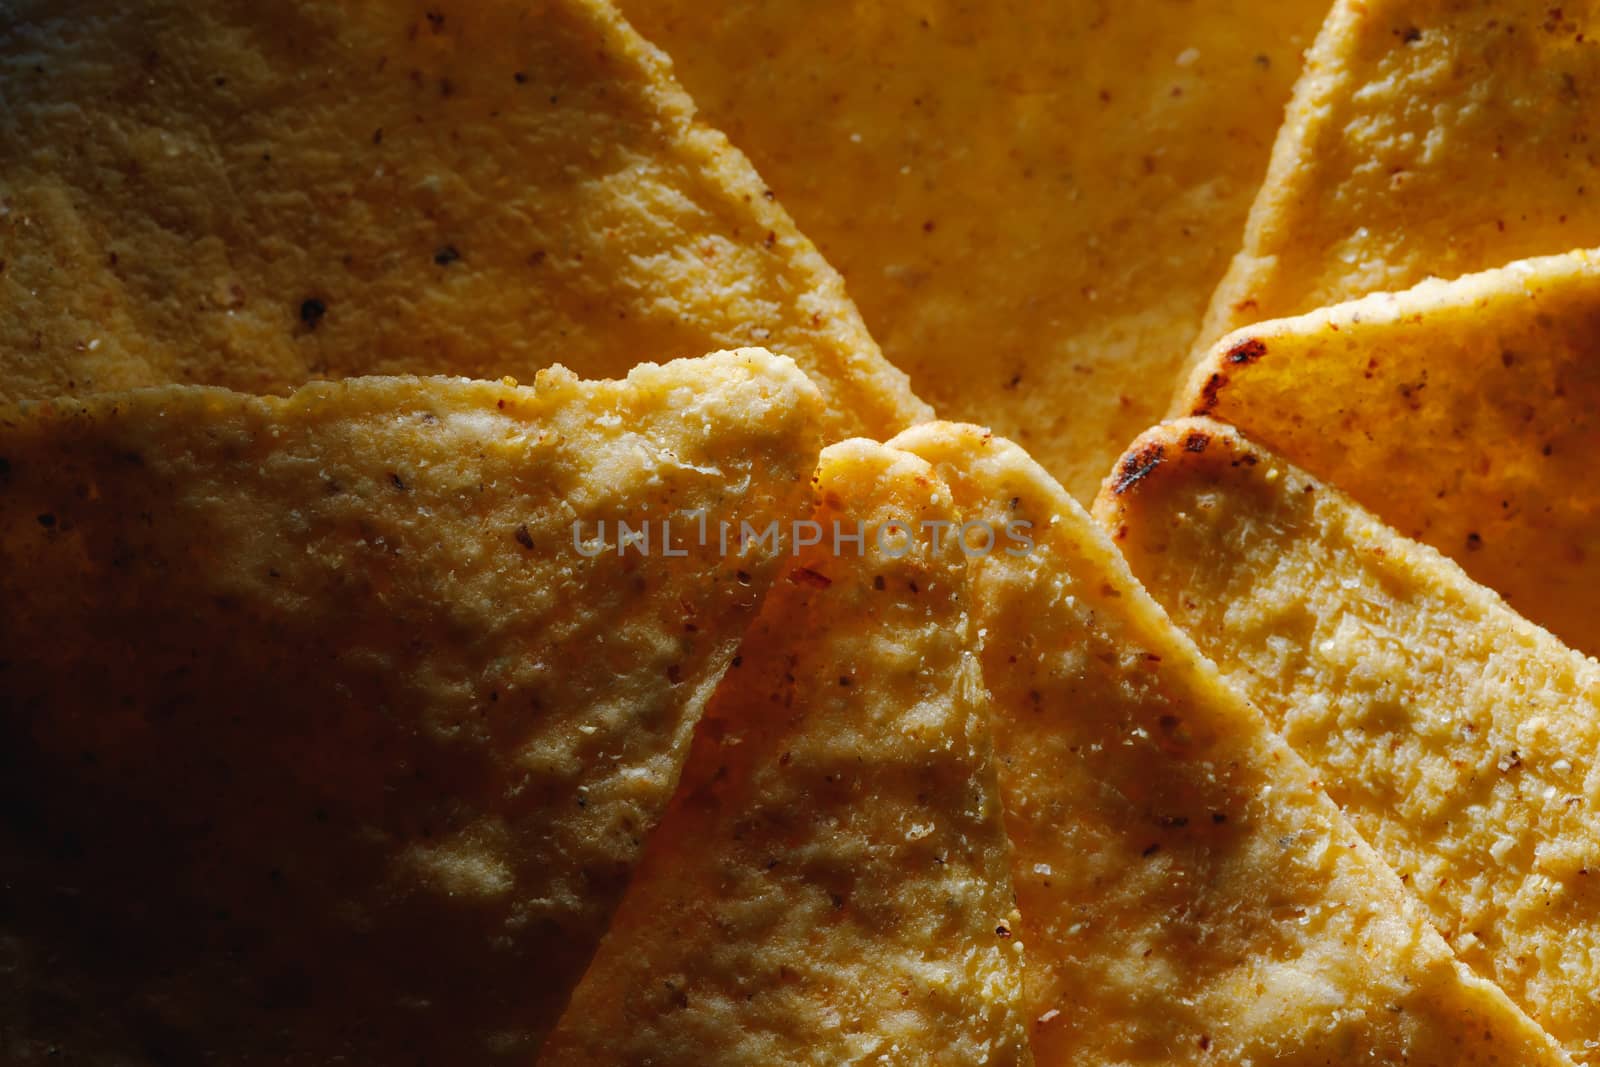 mexican nachos tortilla chips, close-up view by nikkytok